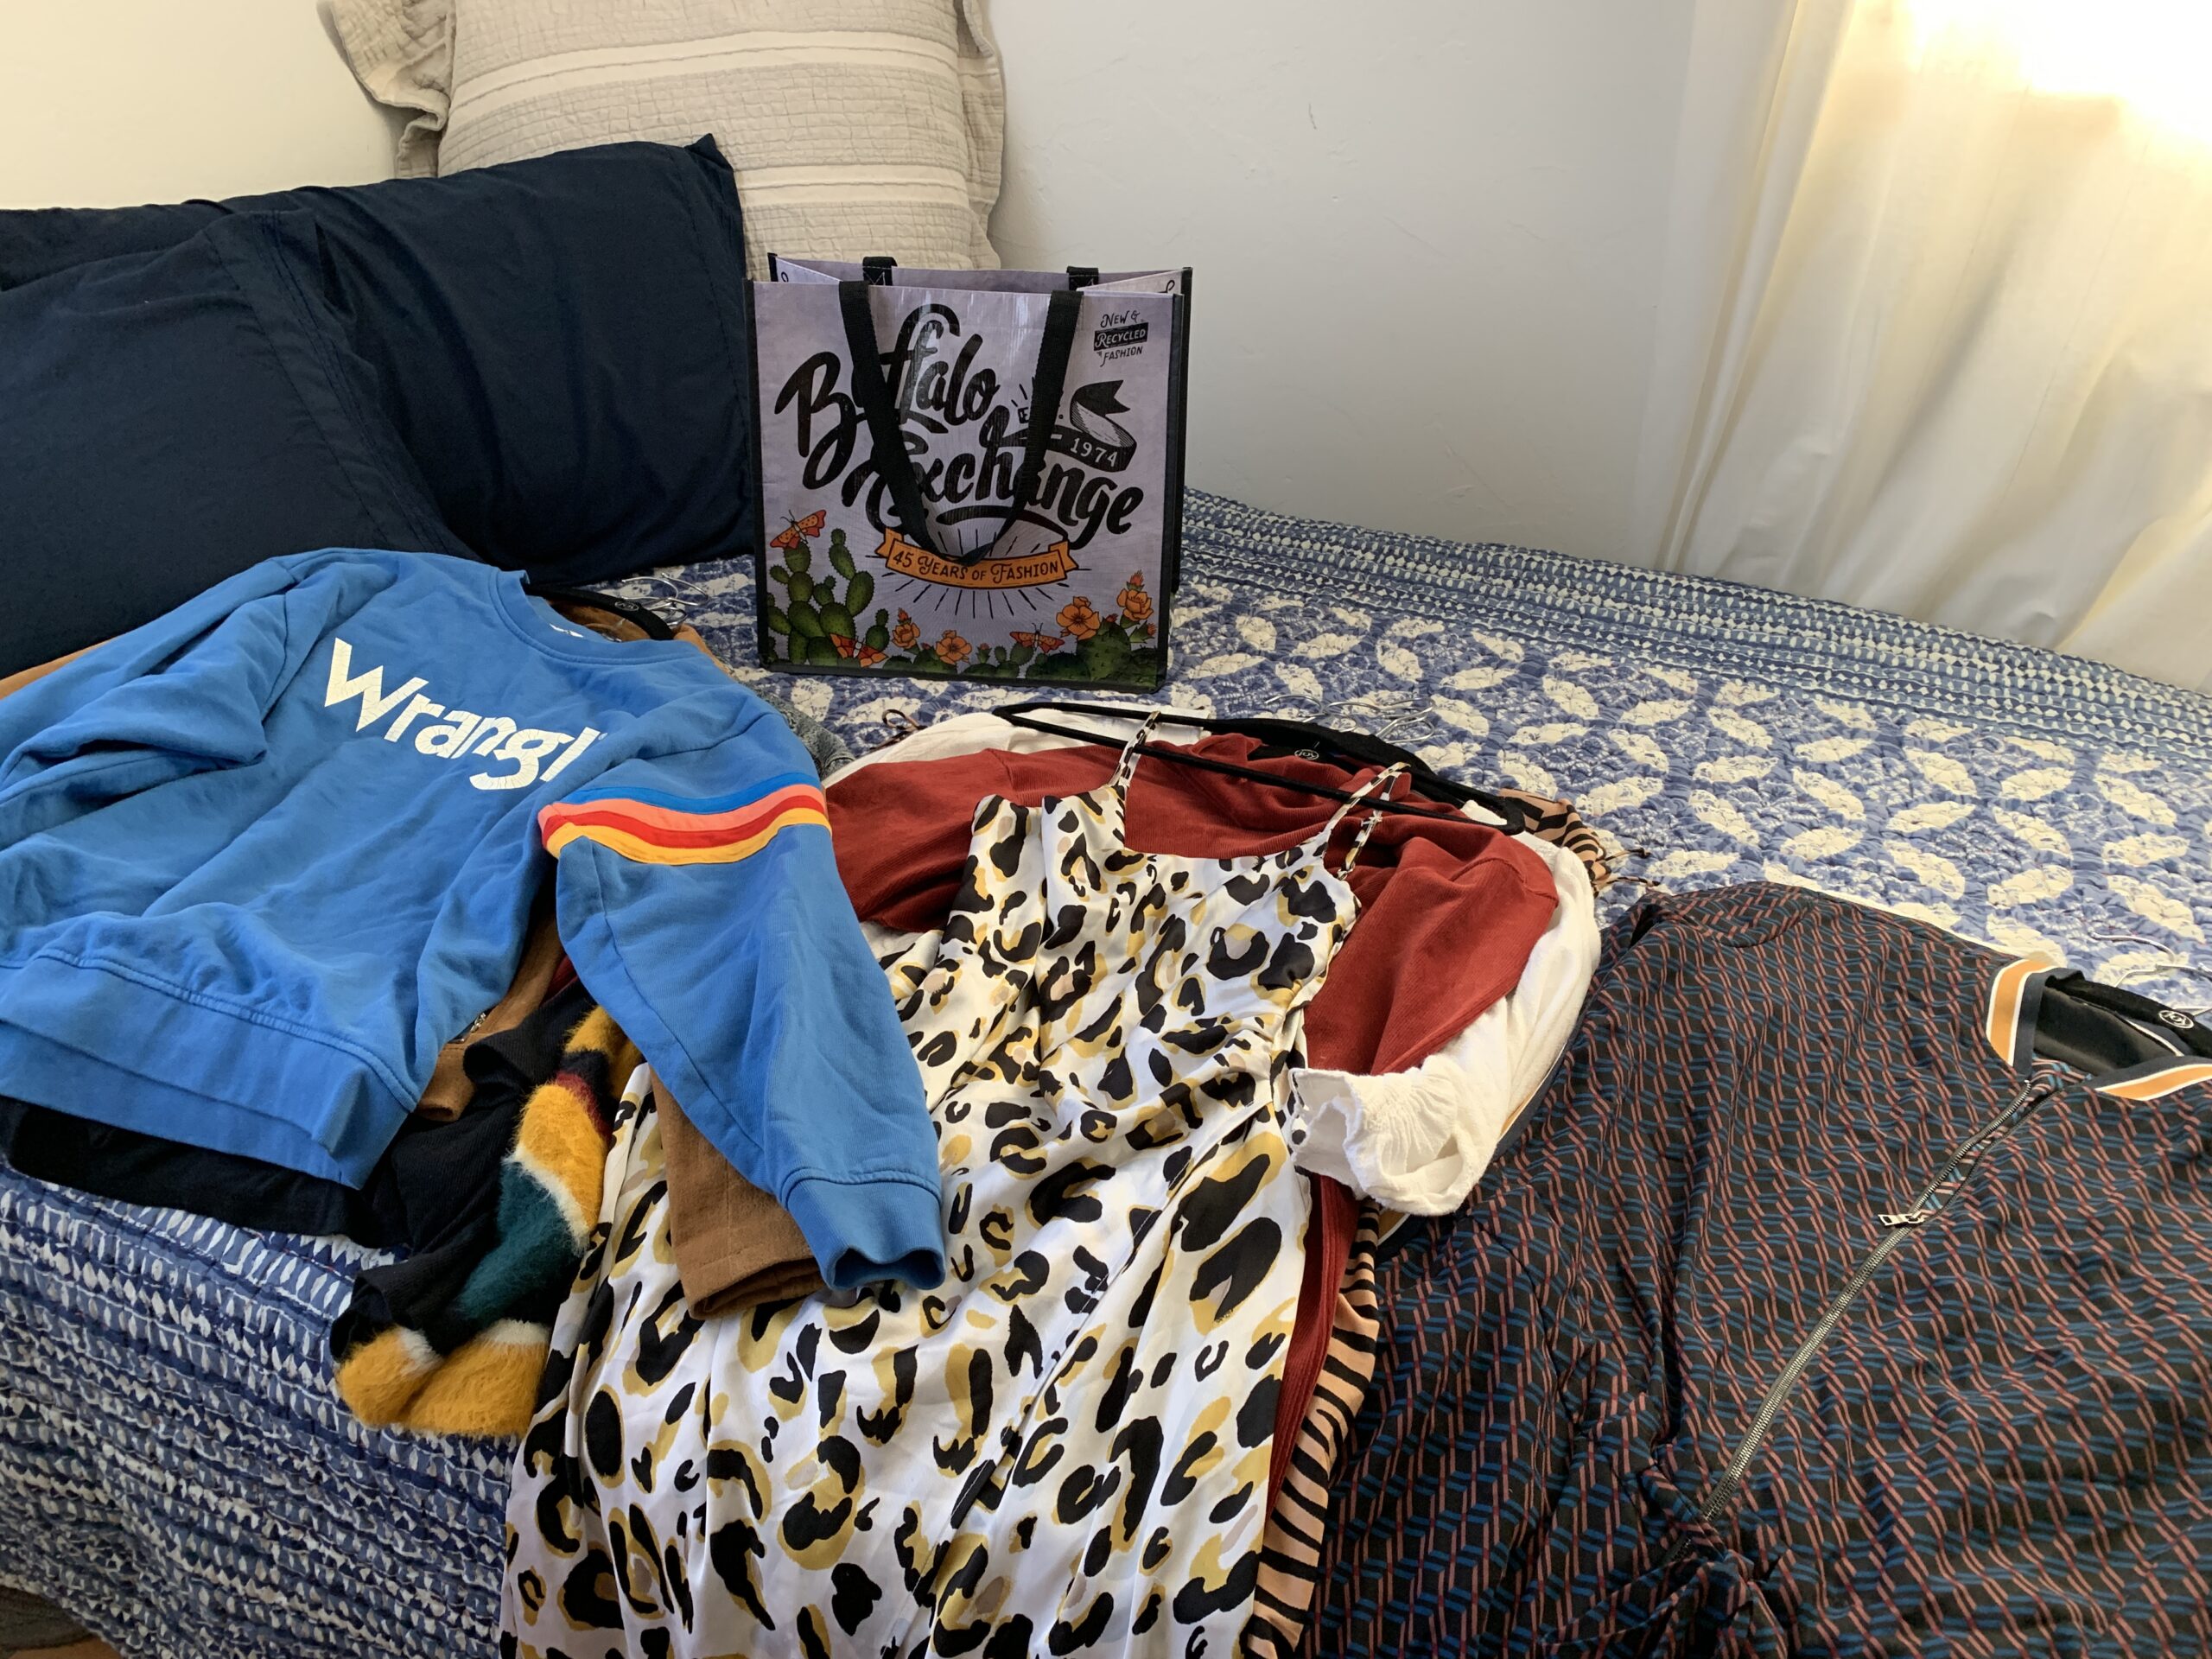 clothes on bed with Buffalo Exchange bag